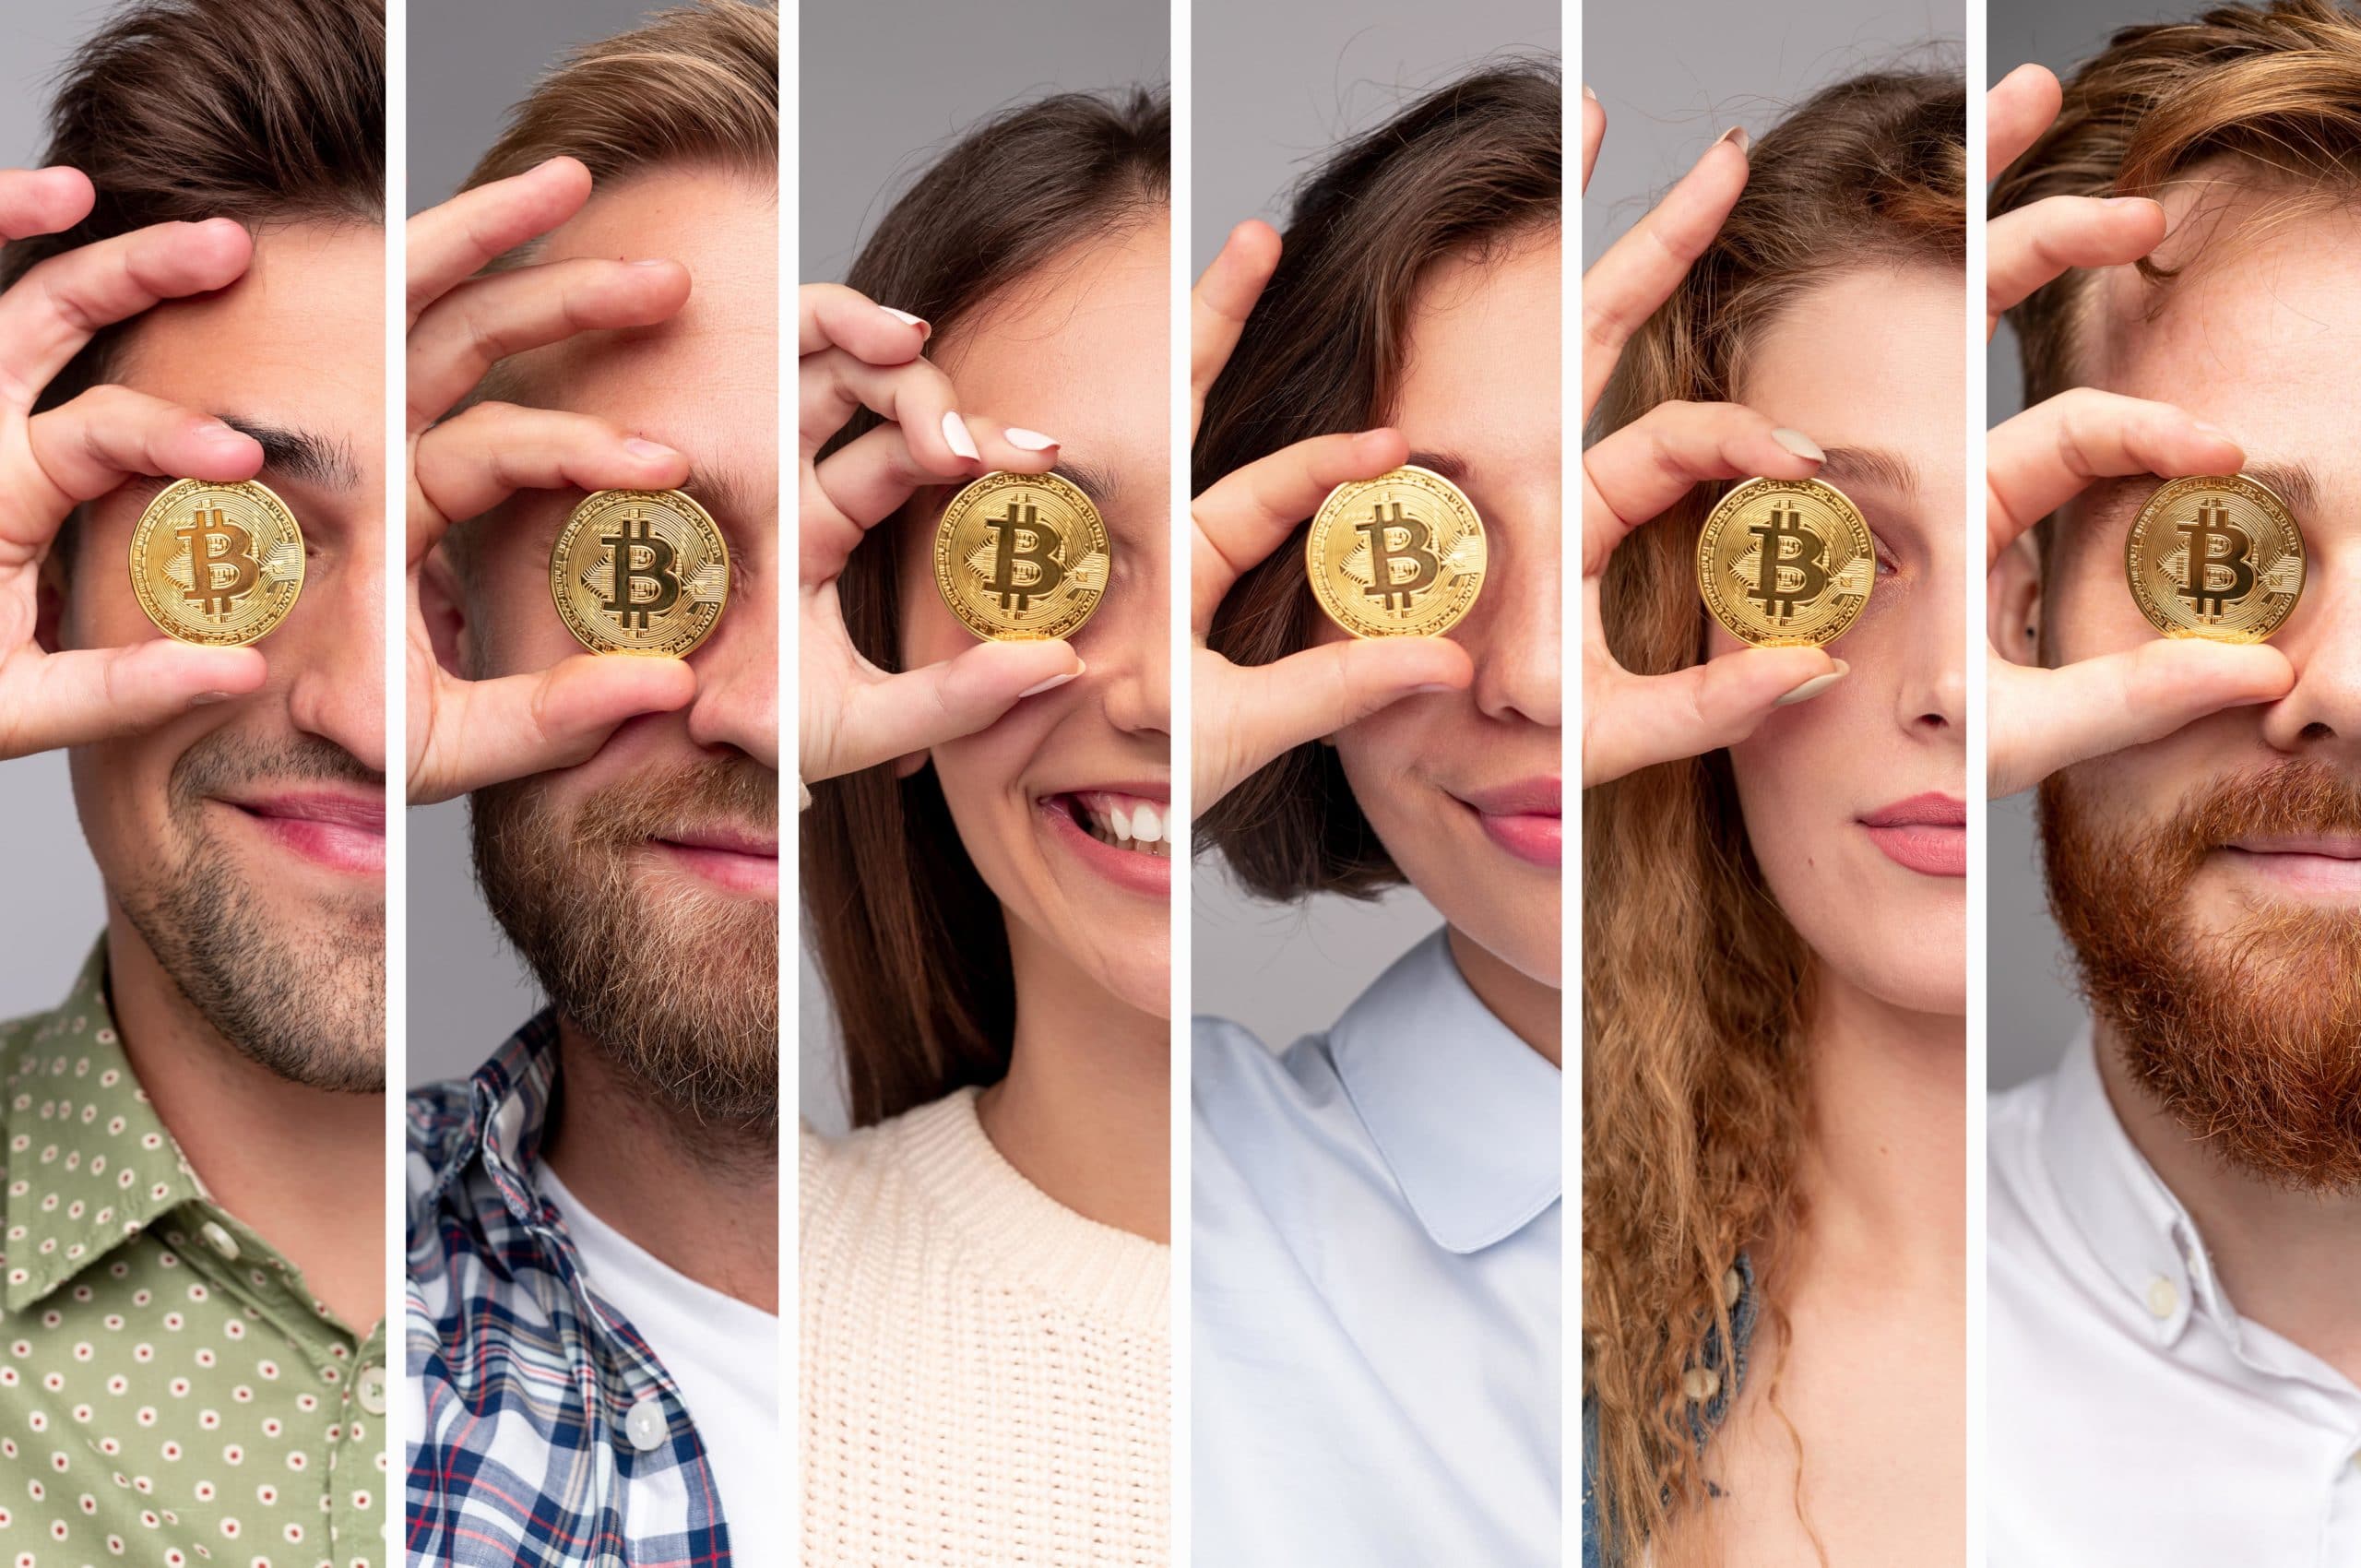 Photo of 6 people holding a physical Bitcoin on their eyes. 